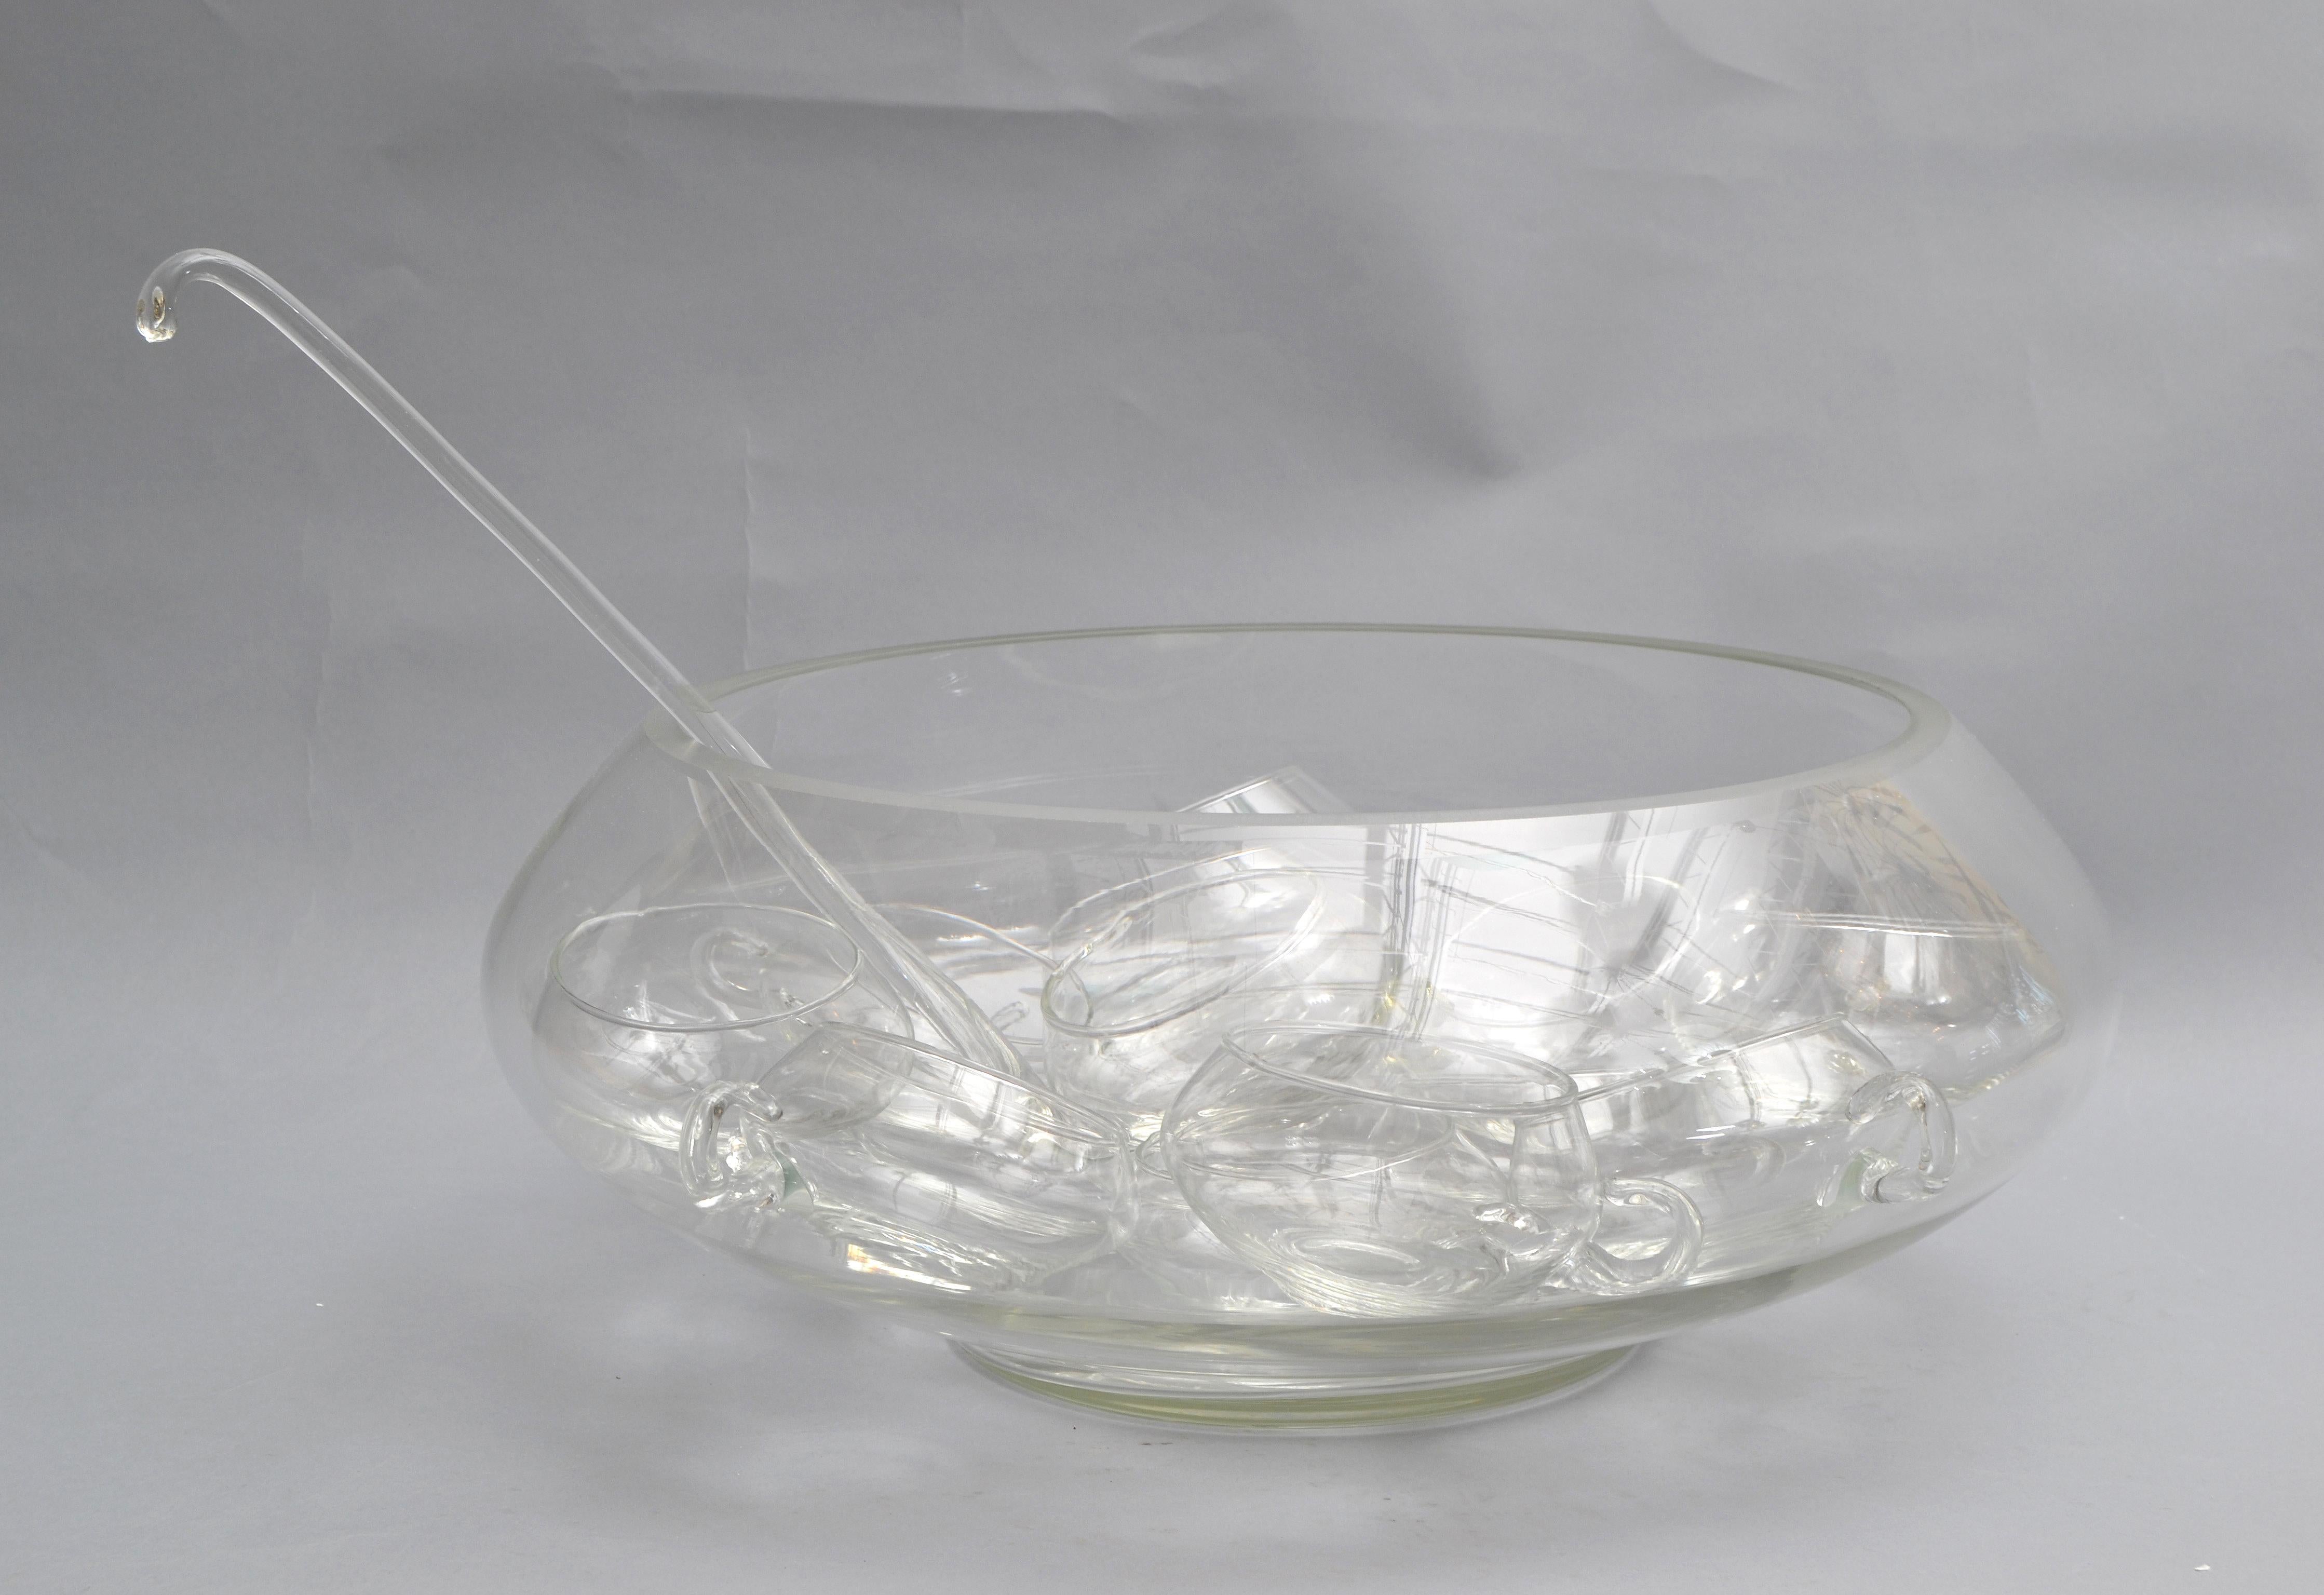 In excellent condition is this 14-piece blown glass punch bowl set made in Italy.
The set is consisting out of a large punch bowl with 12 glass cups and a ladle.
Great for hosting in the Holiday Season.
Dimensions: 
Cups: Height: 2.5 inches, Depth: